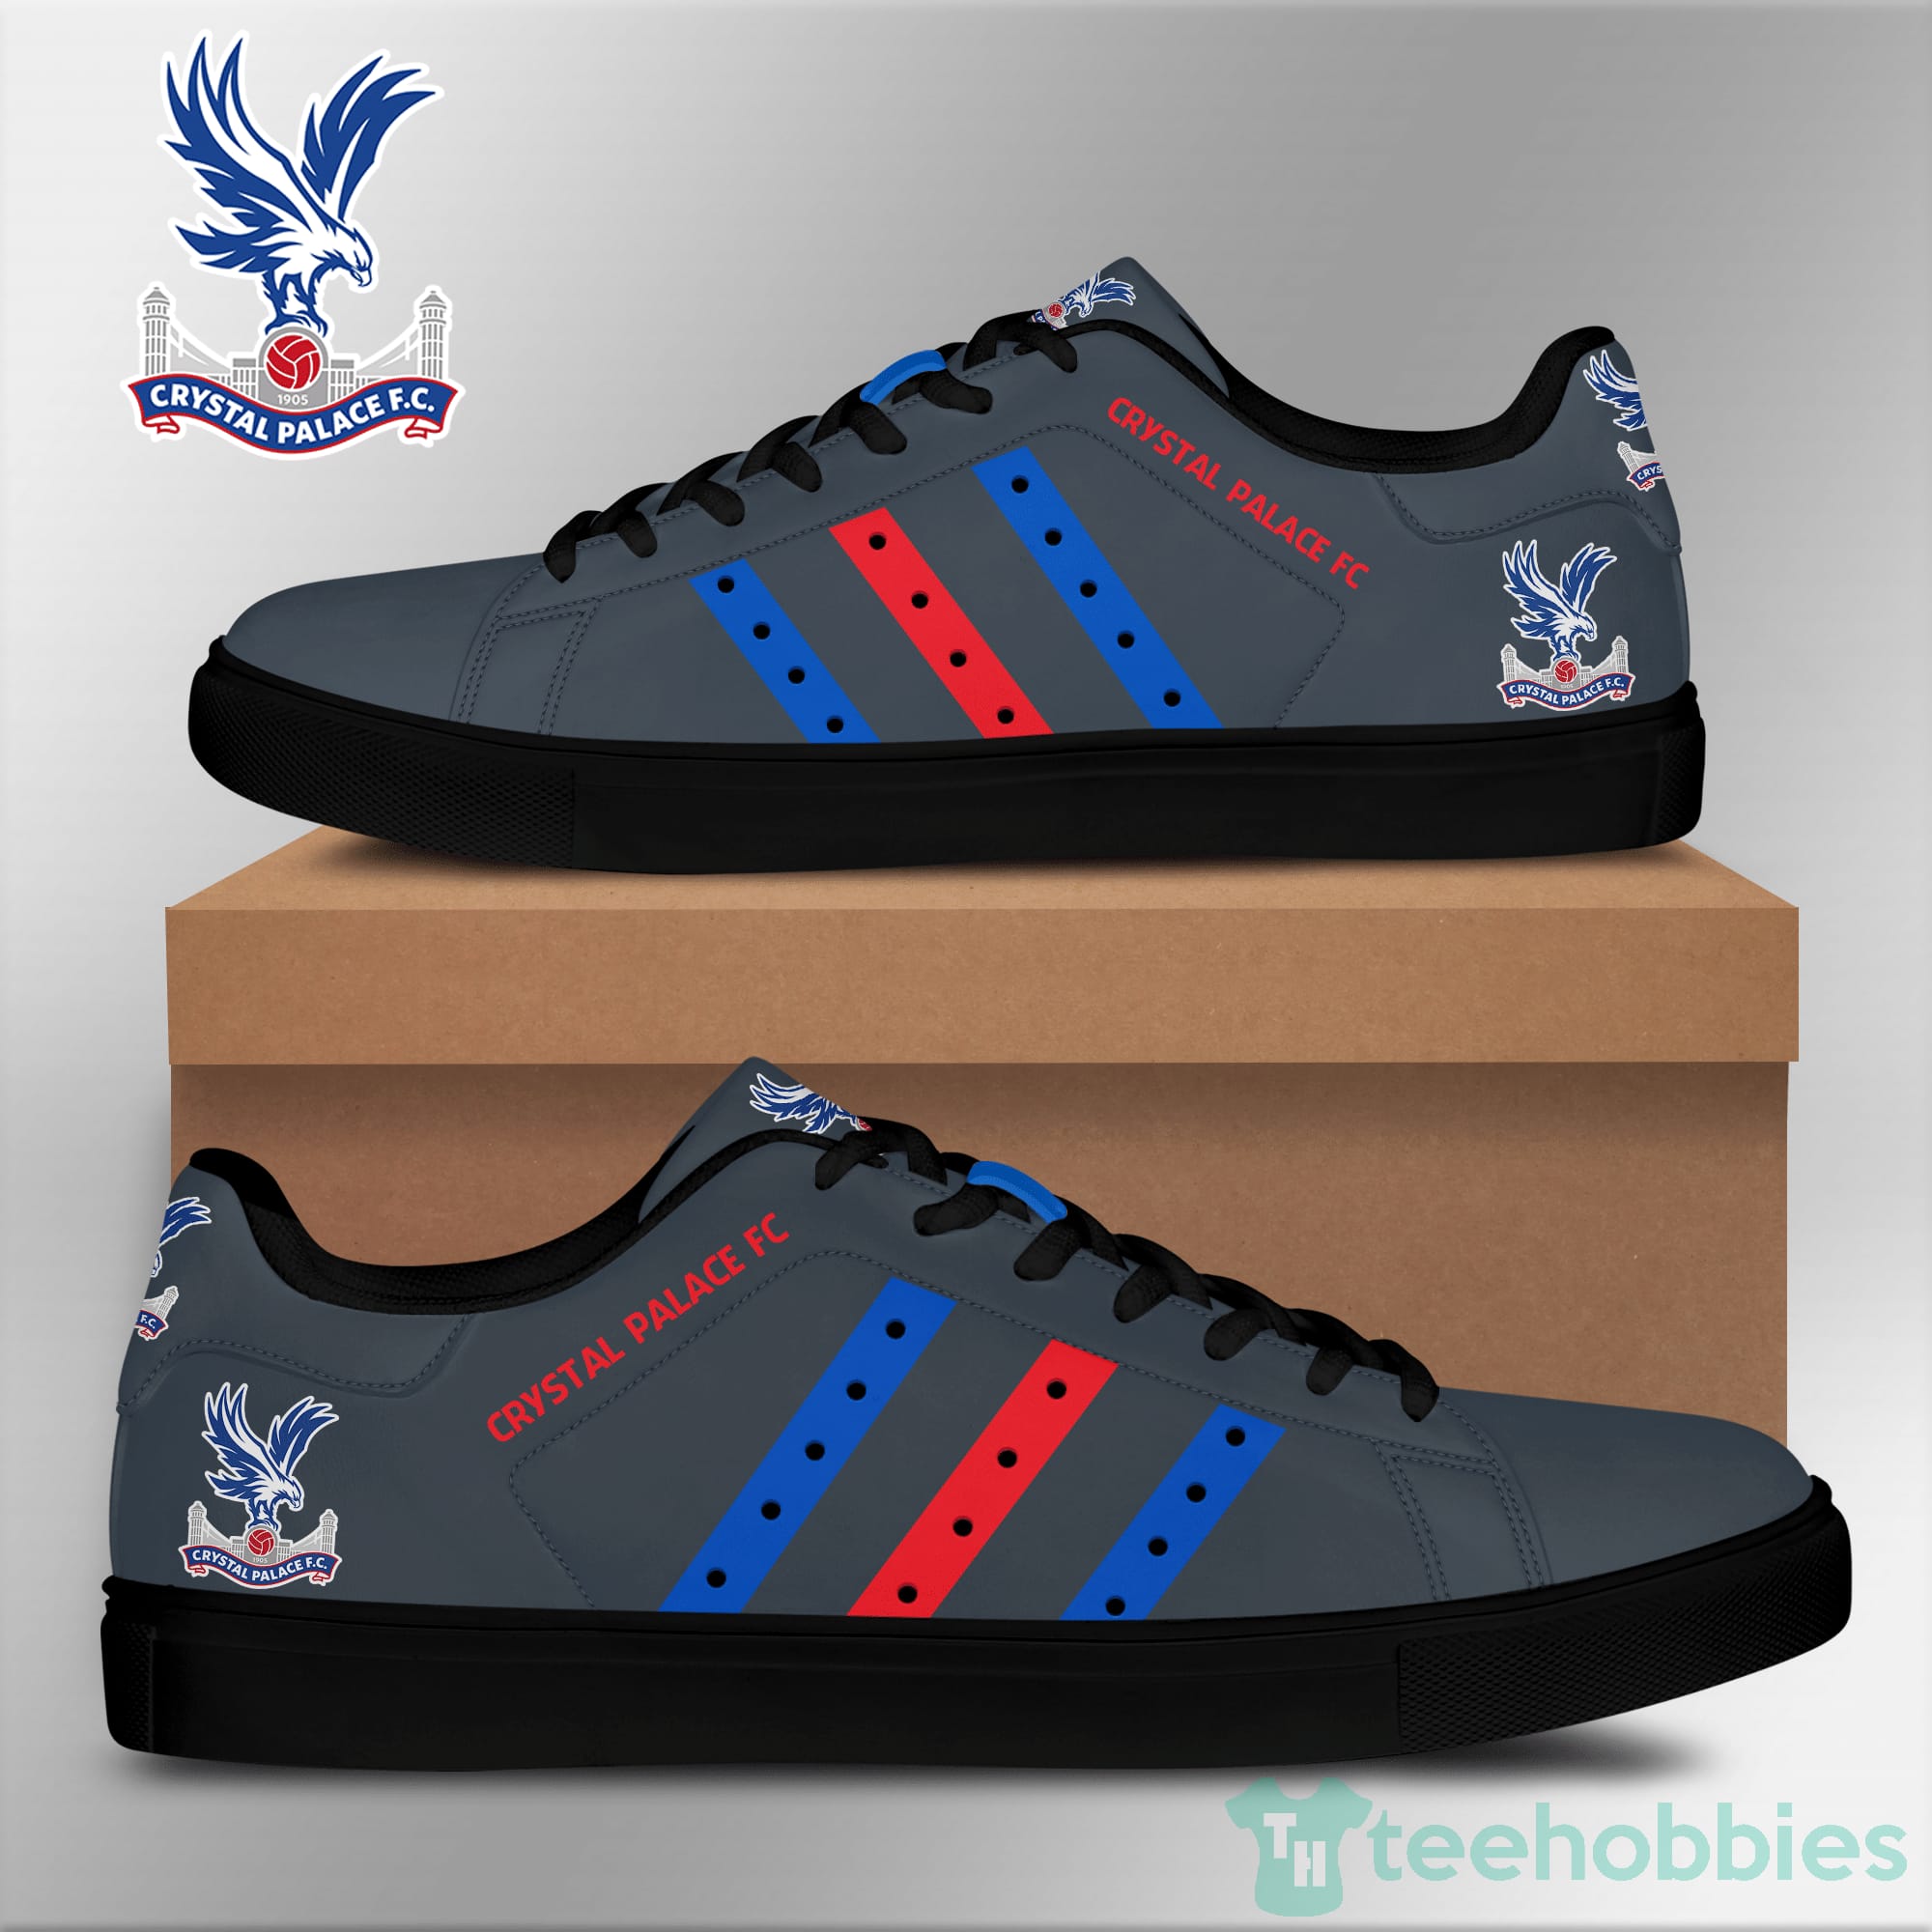 Crystal Palace Fc Grey Low Top Skate Shoes Product photo 2